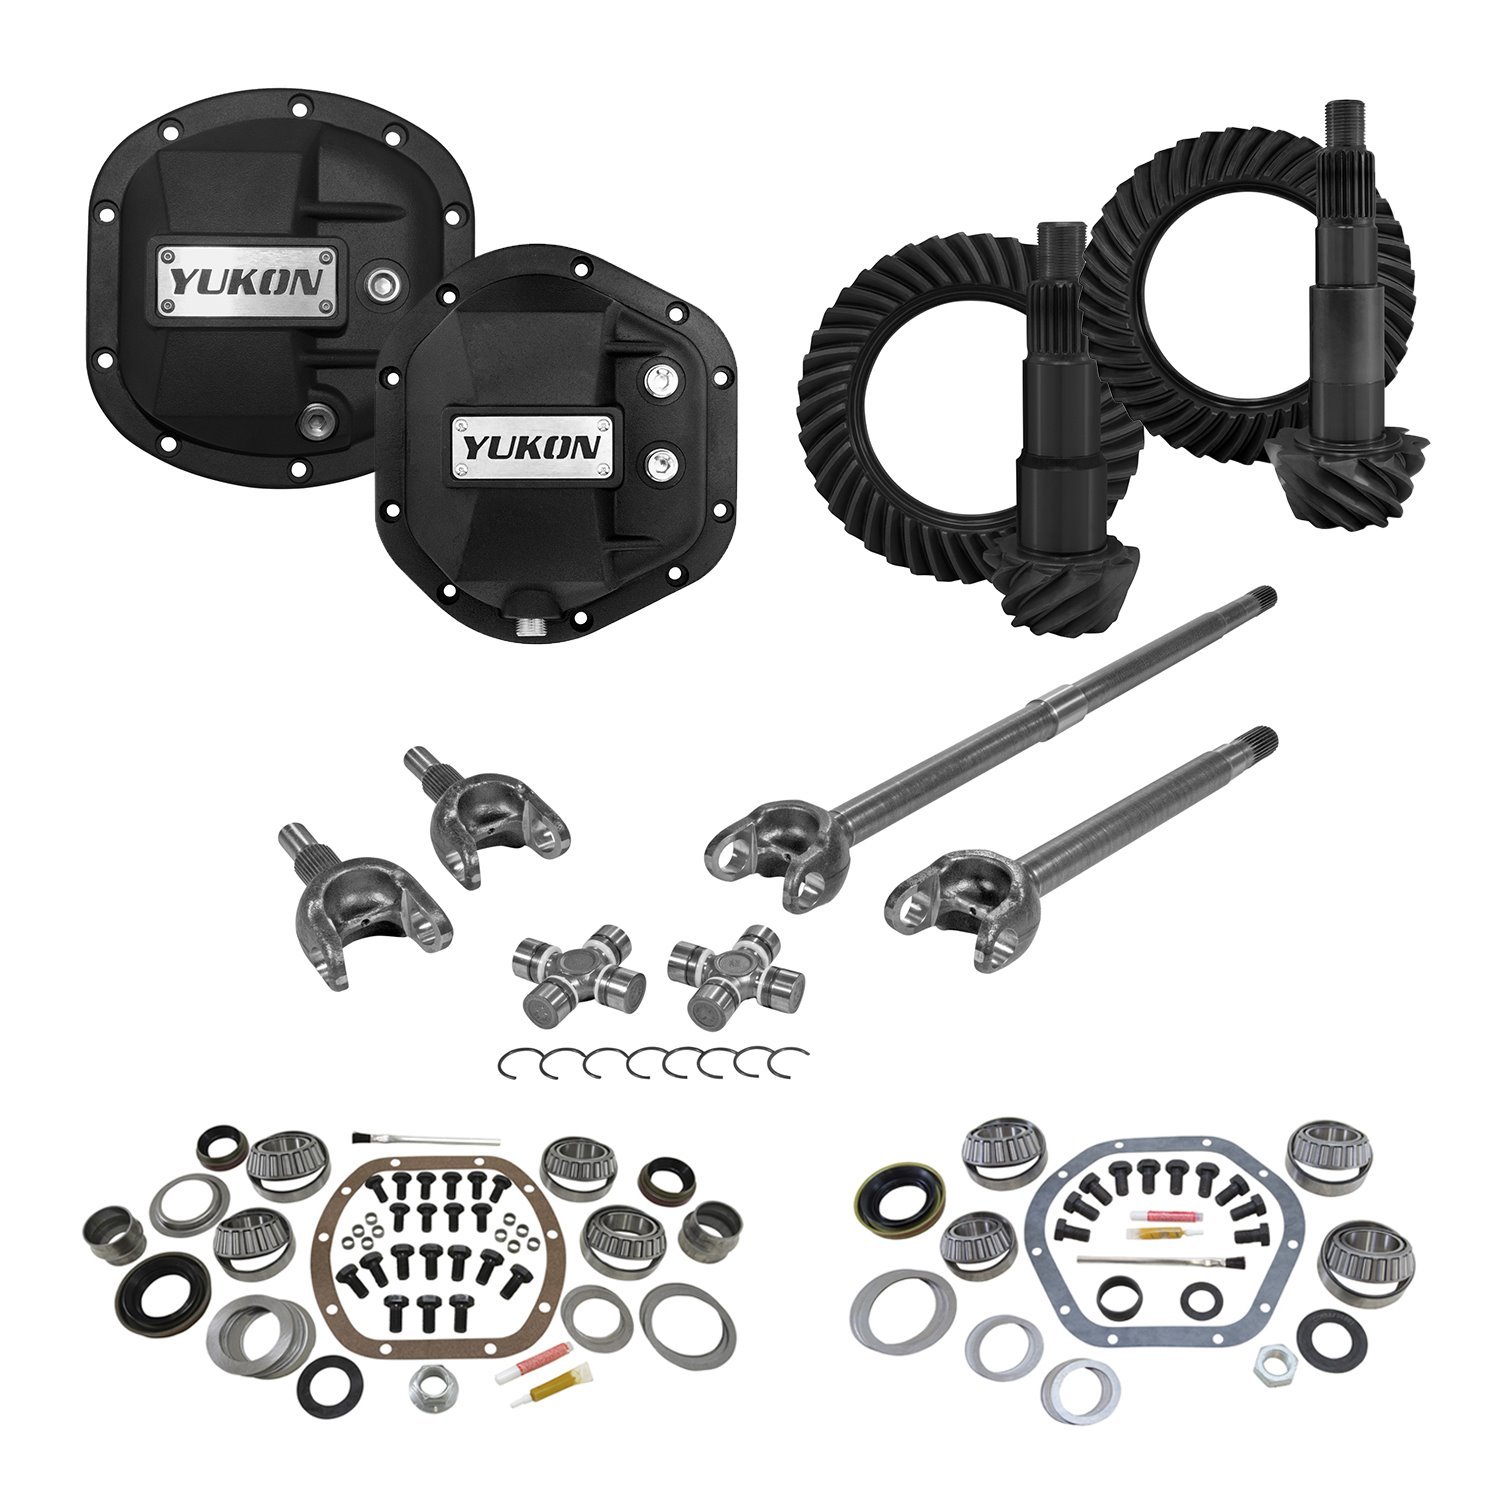 Stage 3 Jeep Jk Re-Gear Kit W/Covers, Front Axles, Dana 30/44, 4.56 Ratio